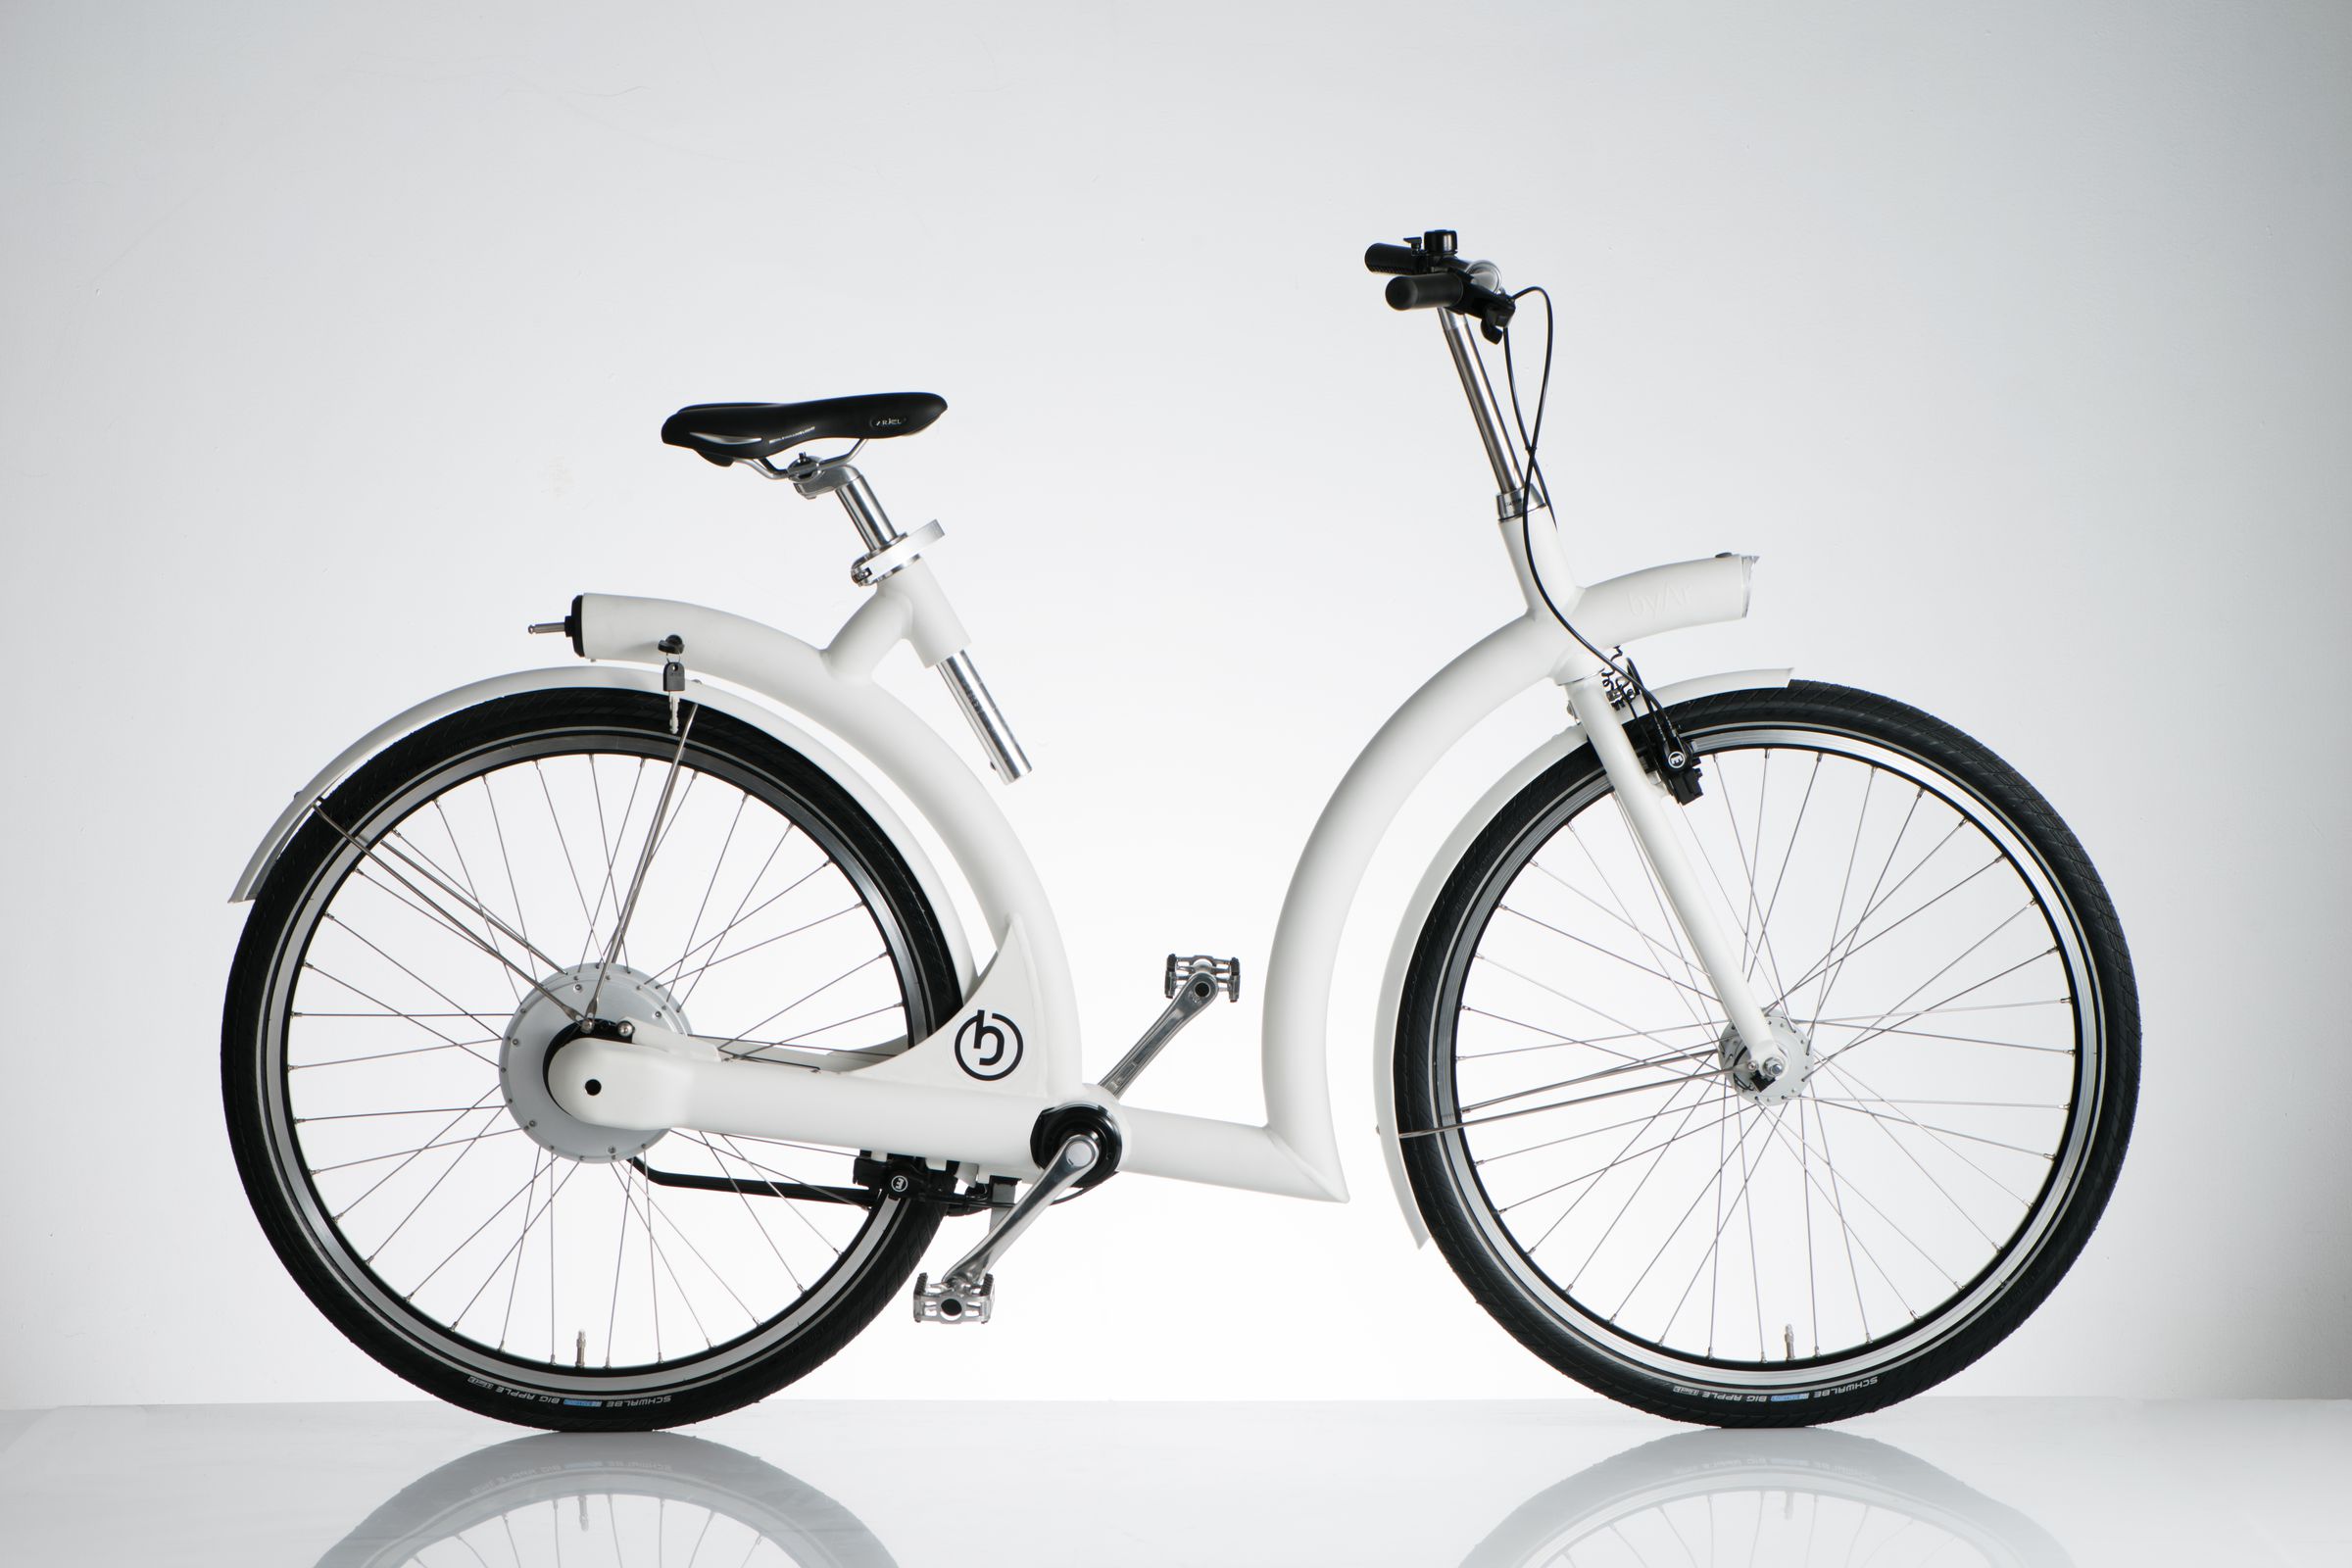 The 2019 production model of the Byar Volta electric bike.